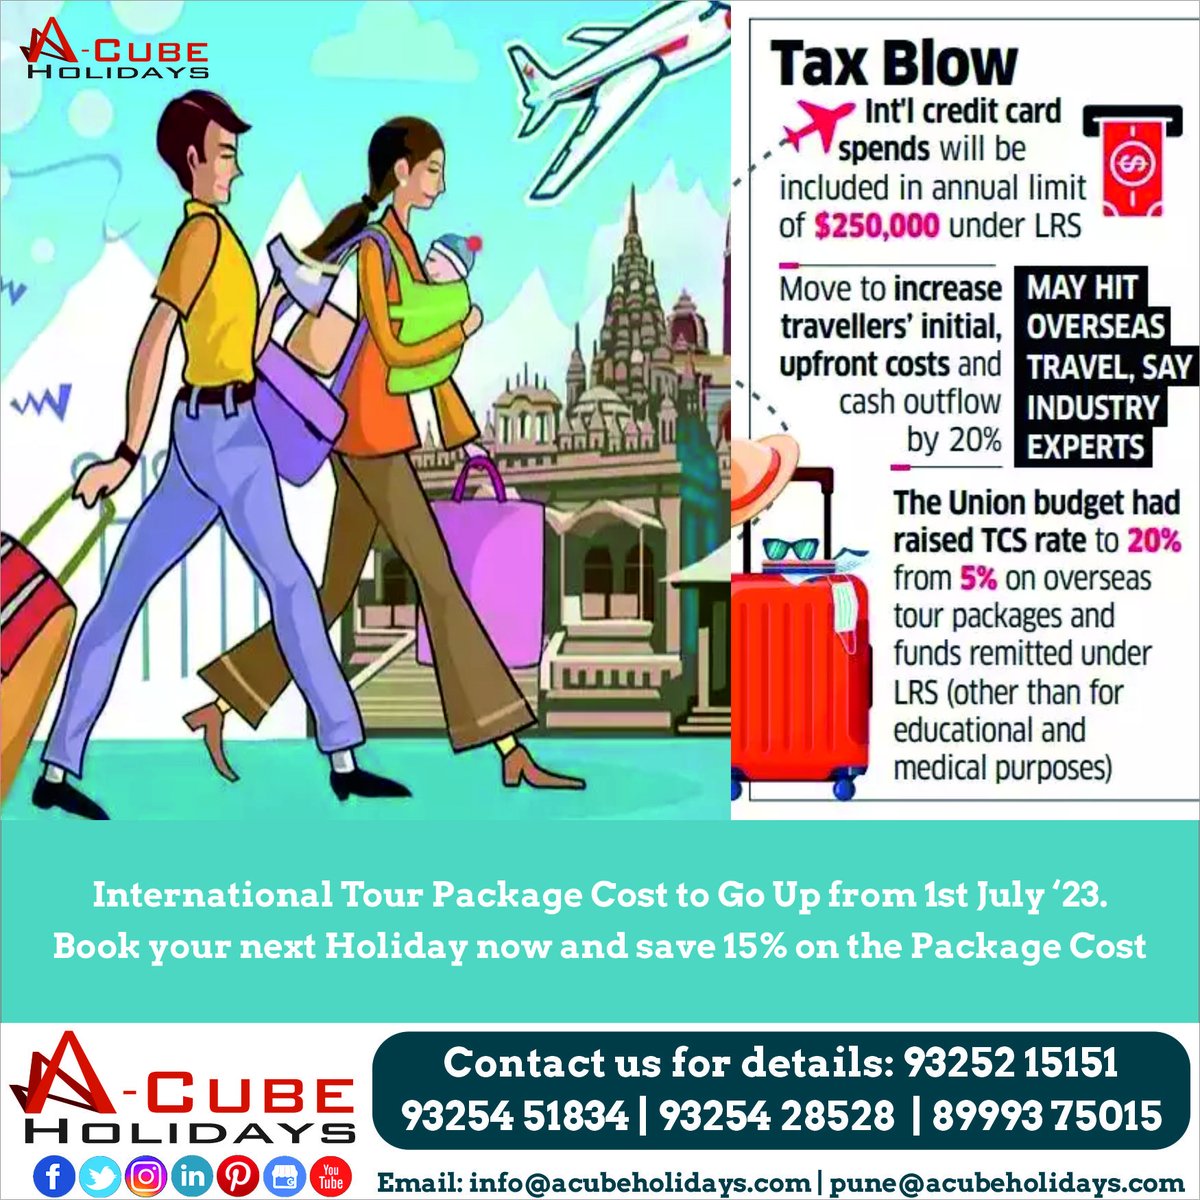 Book your next Holiday NOW! SAVE 15% on the International Holiday Package Cost!

#TCS #tcs #incometax #IncomeTax2023 #Budget2023 #international #tourpackage #holidaypackage #familyholiday #summerholiday #LRS #specialoffer #SpecialDeal #bestdeal #bestoffer #internationalholiday